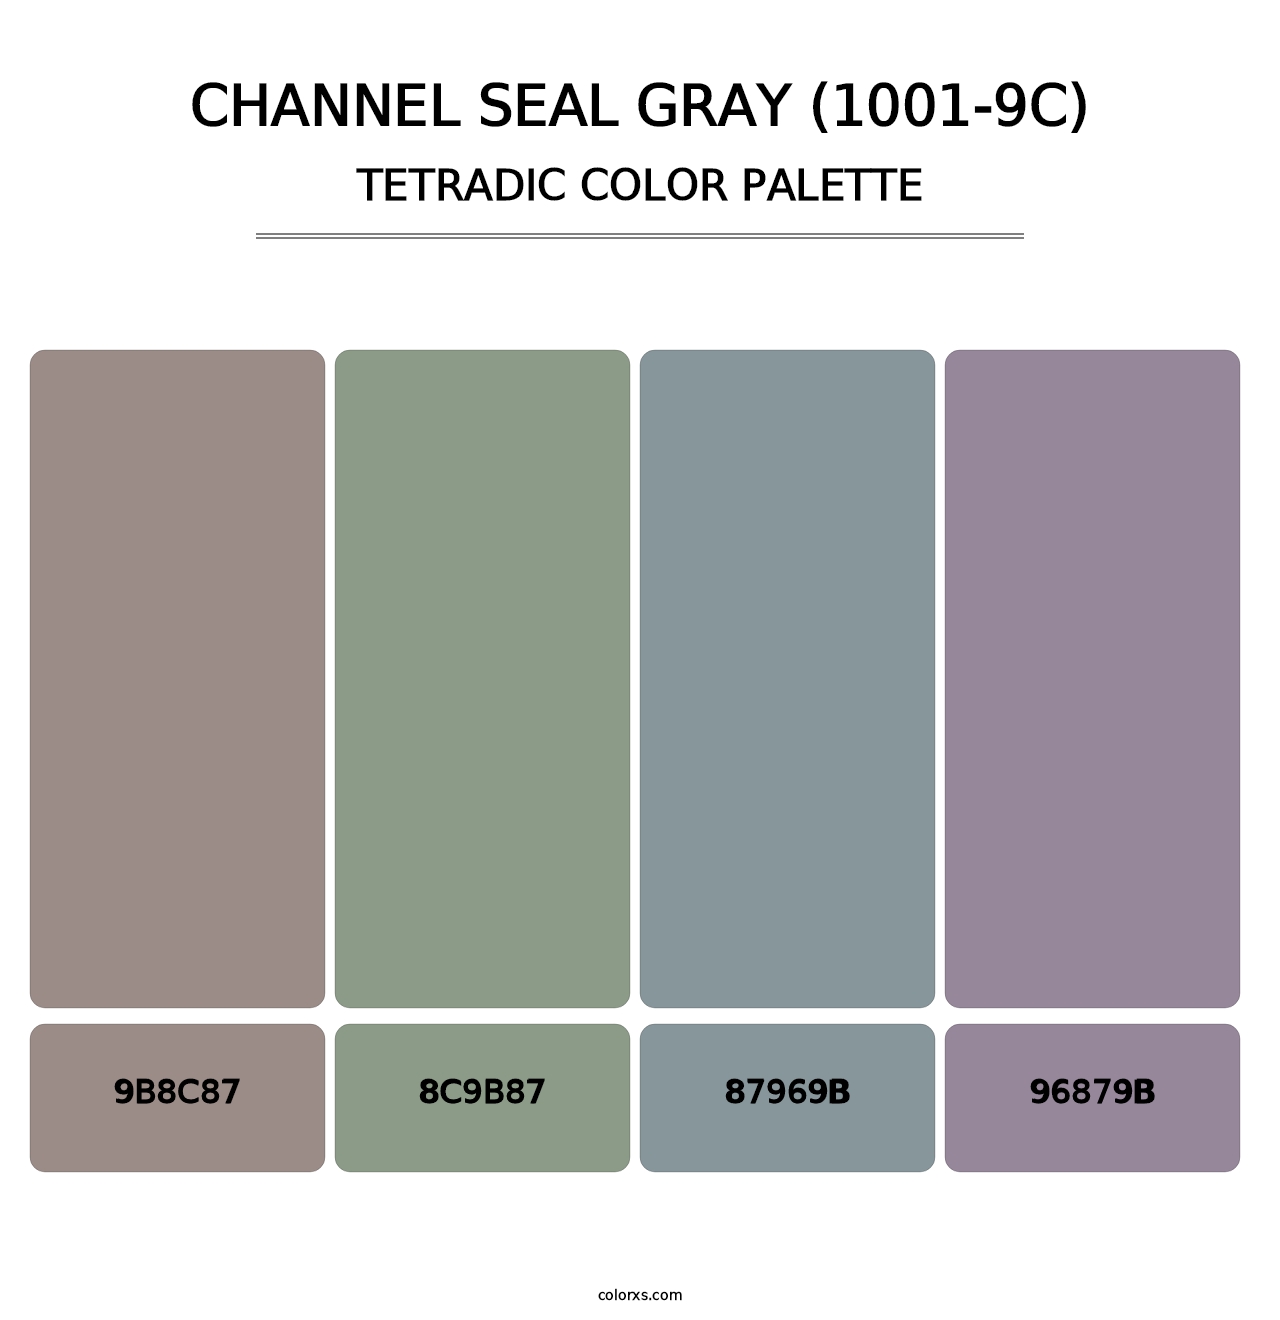 Channel Seal Gray (1001-9C) - Tetradic Color Palette